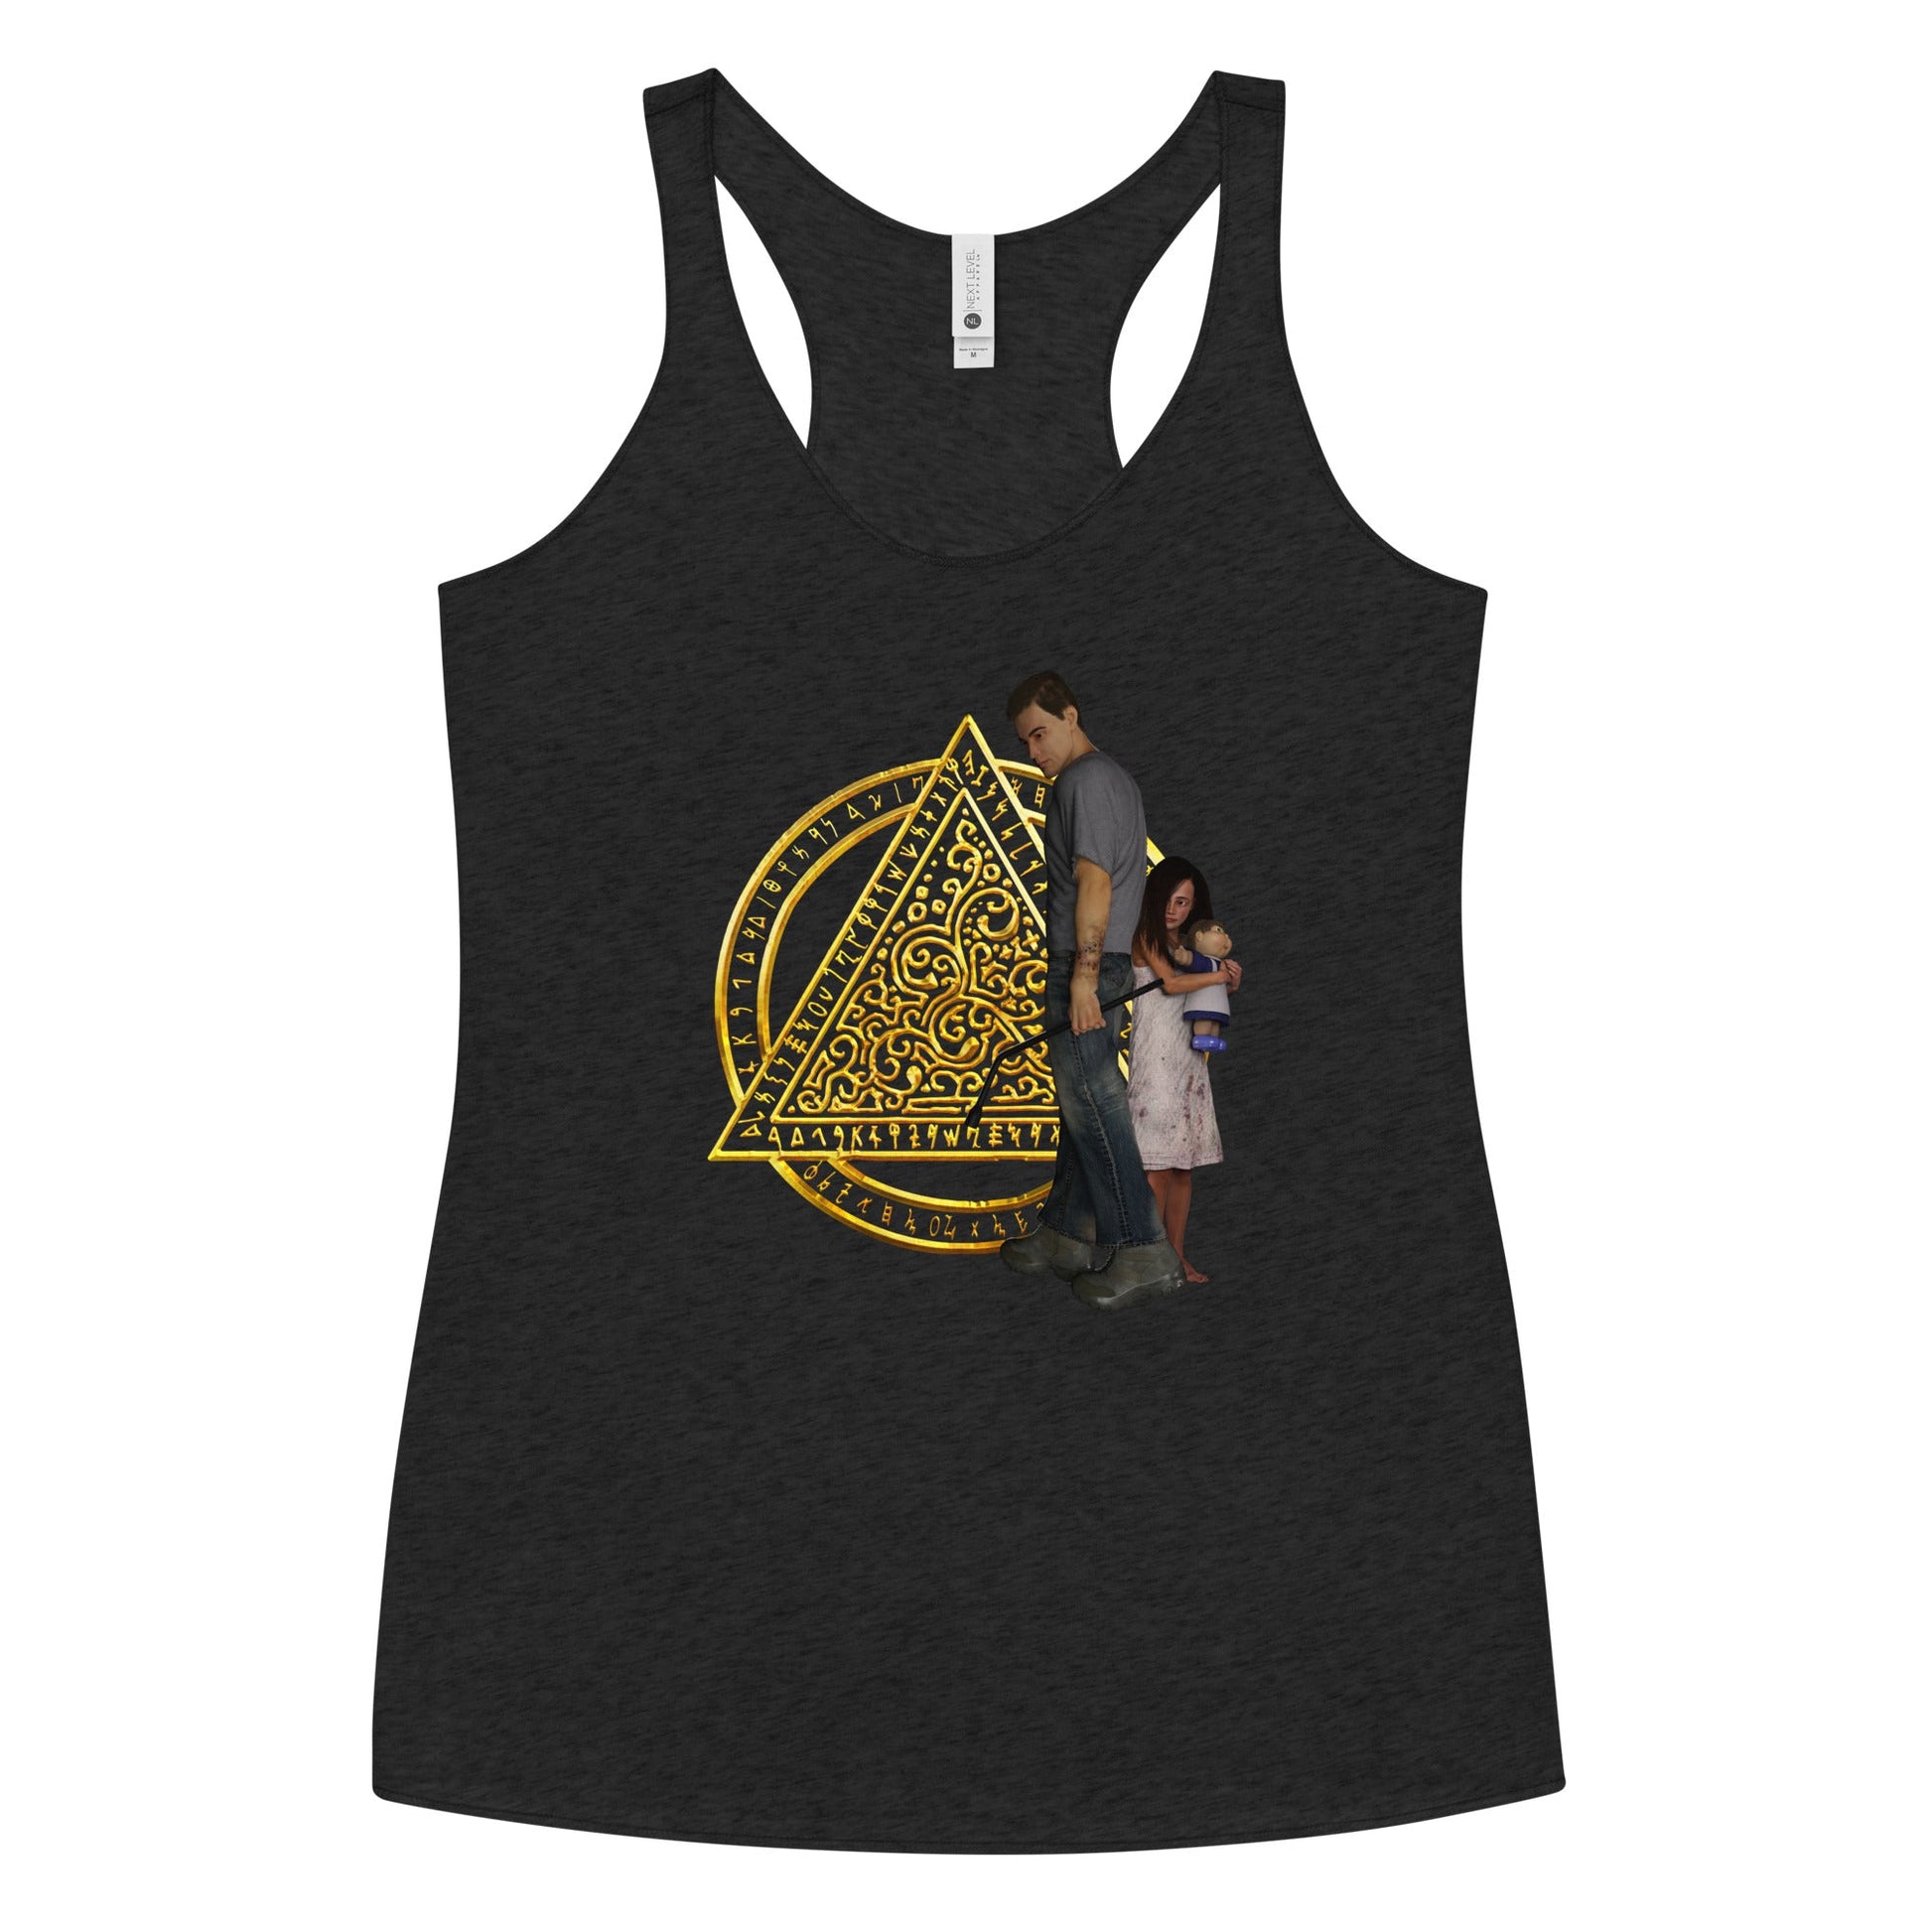 Women's Racerback Tank | The Last Rite | Daniel and Bethany - Spectral Ink Shop - Tank Top -9316487_6651